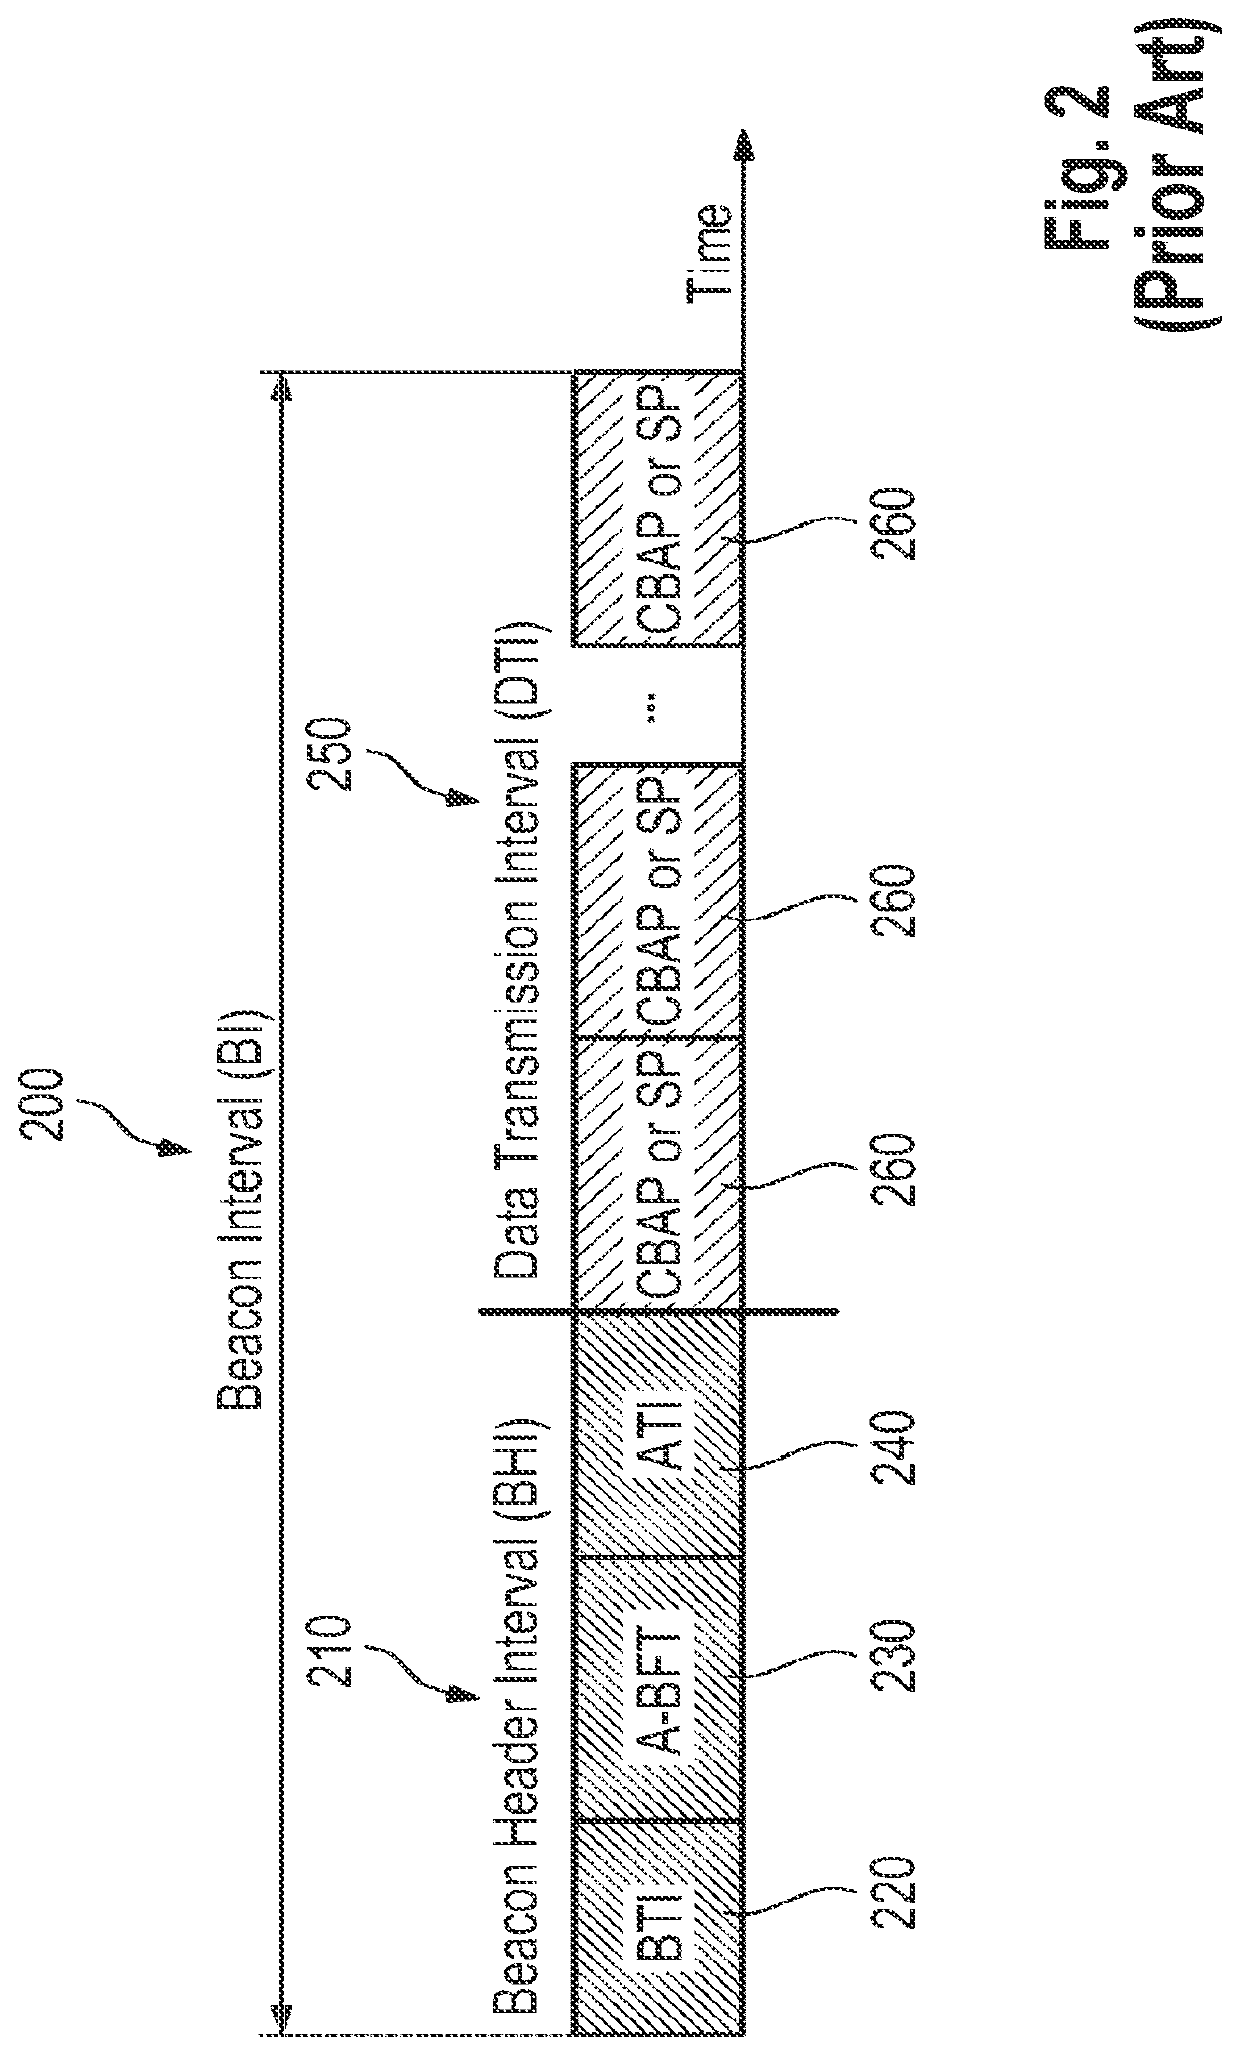 Spatial reuse for scheduled data transfer periods